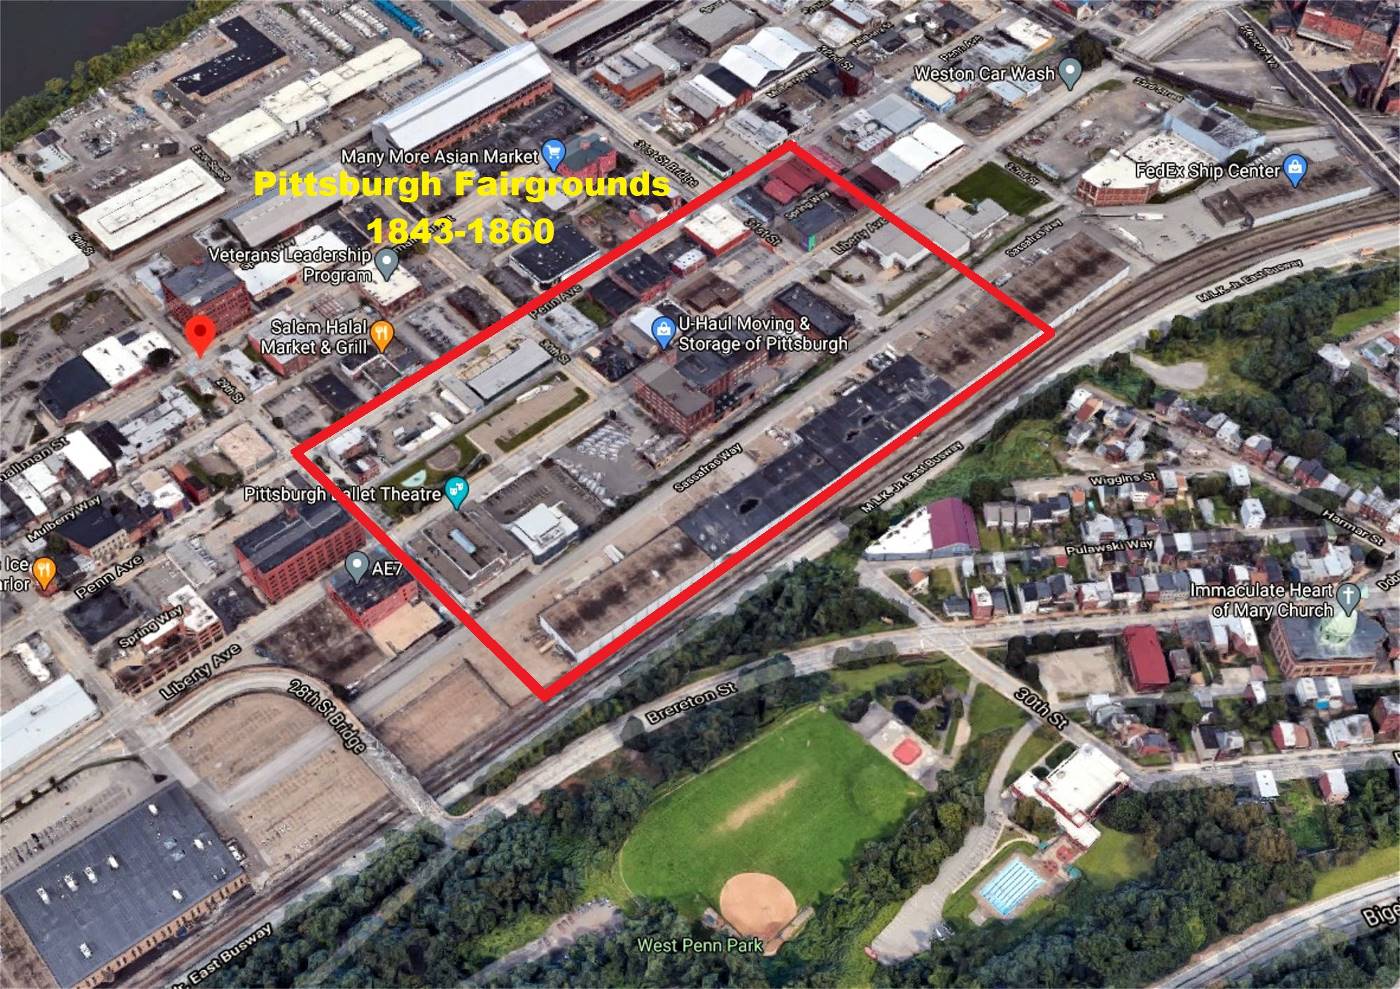 Location of old Pittsburgh Fairgrounds.